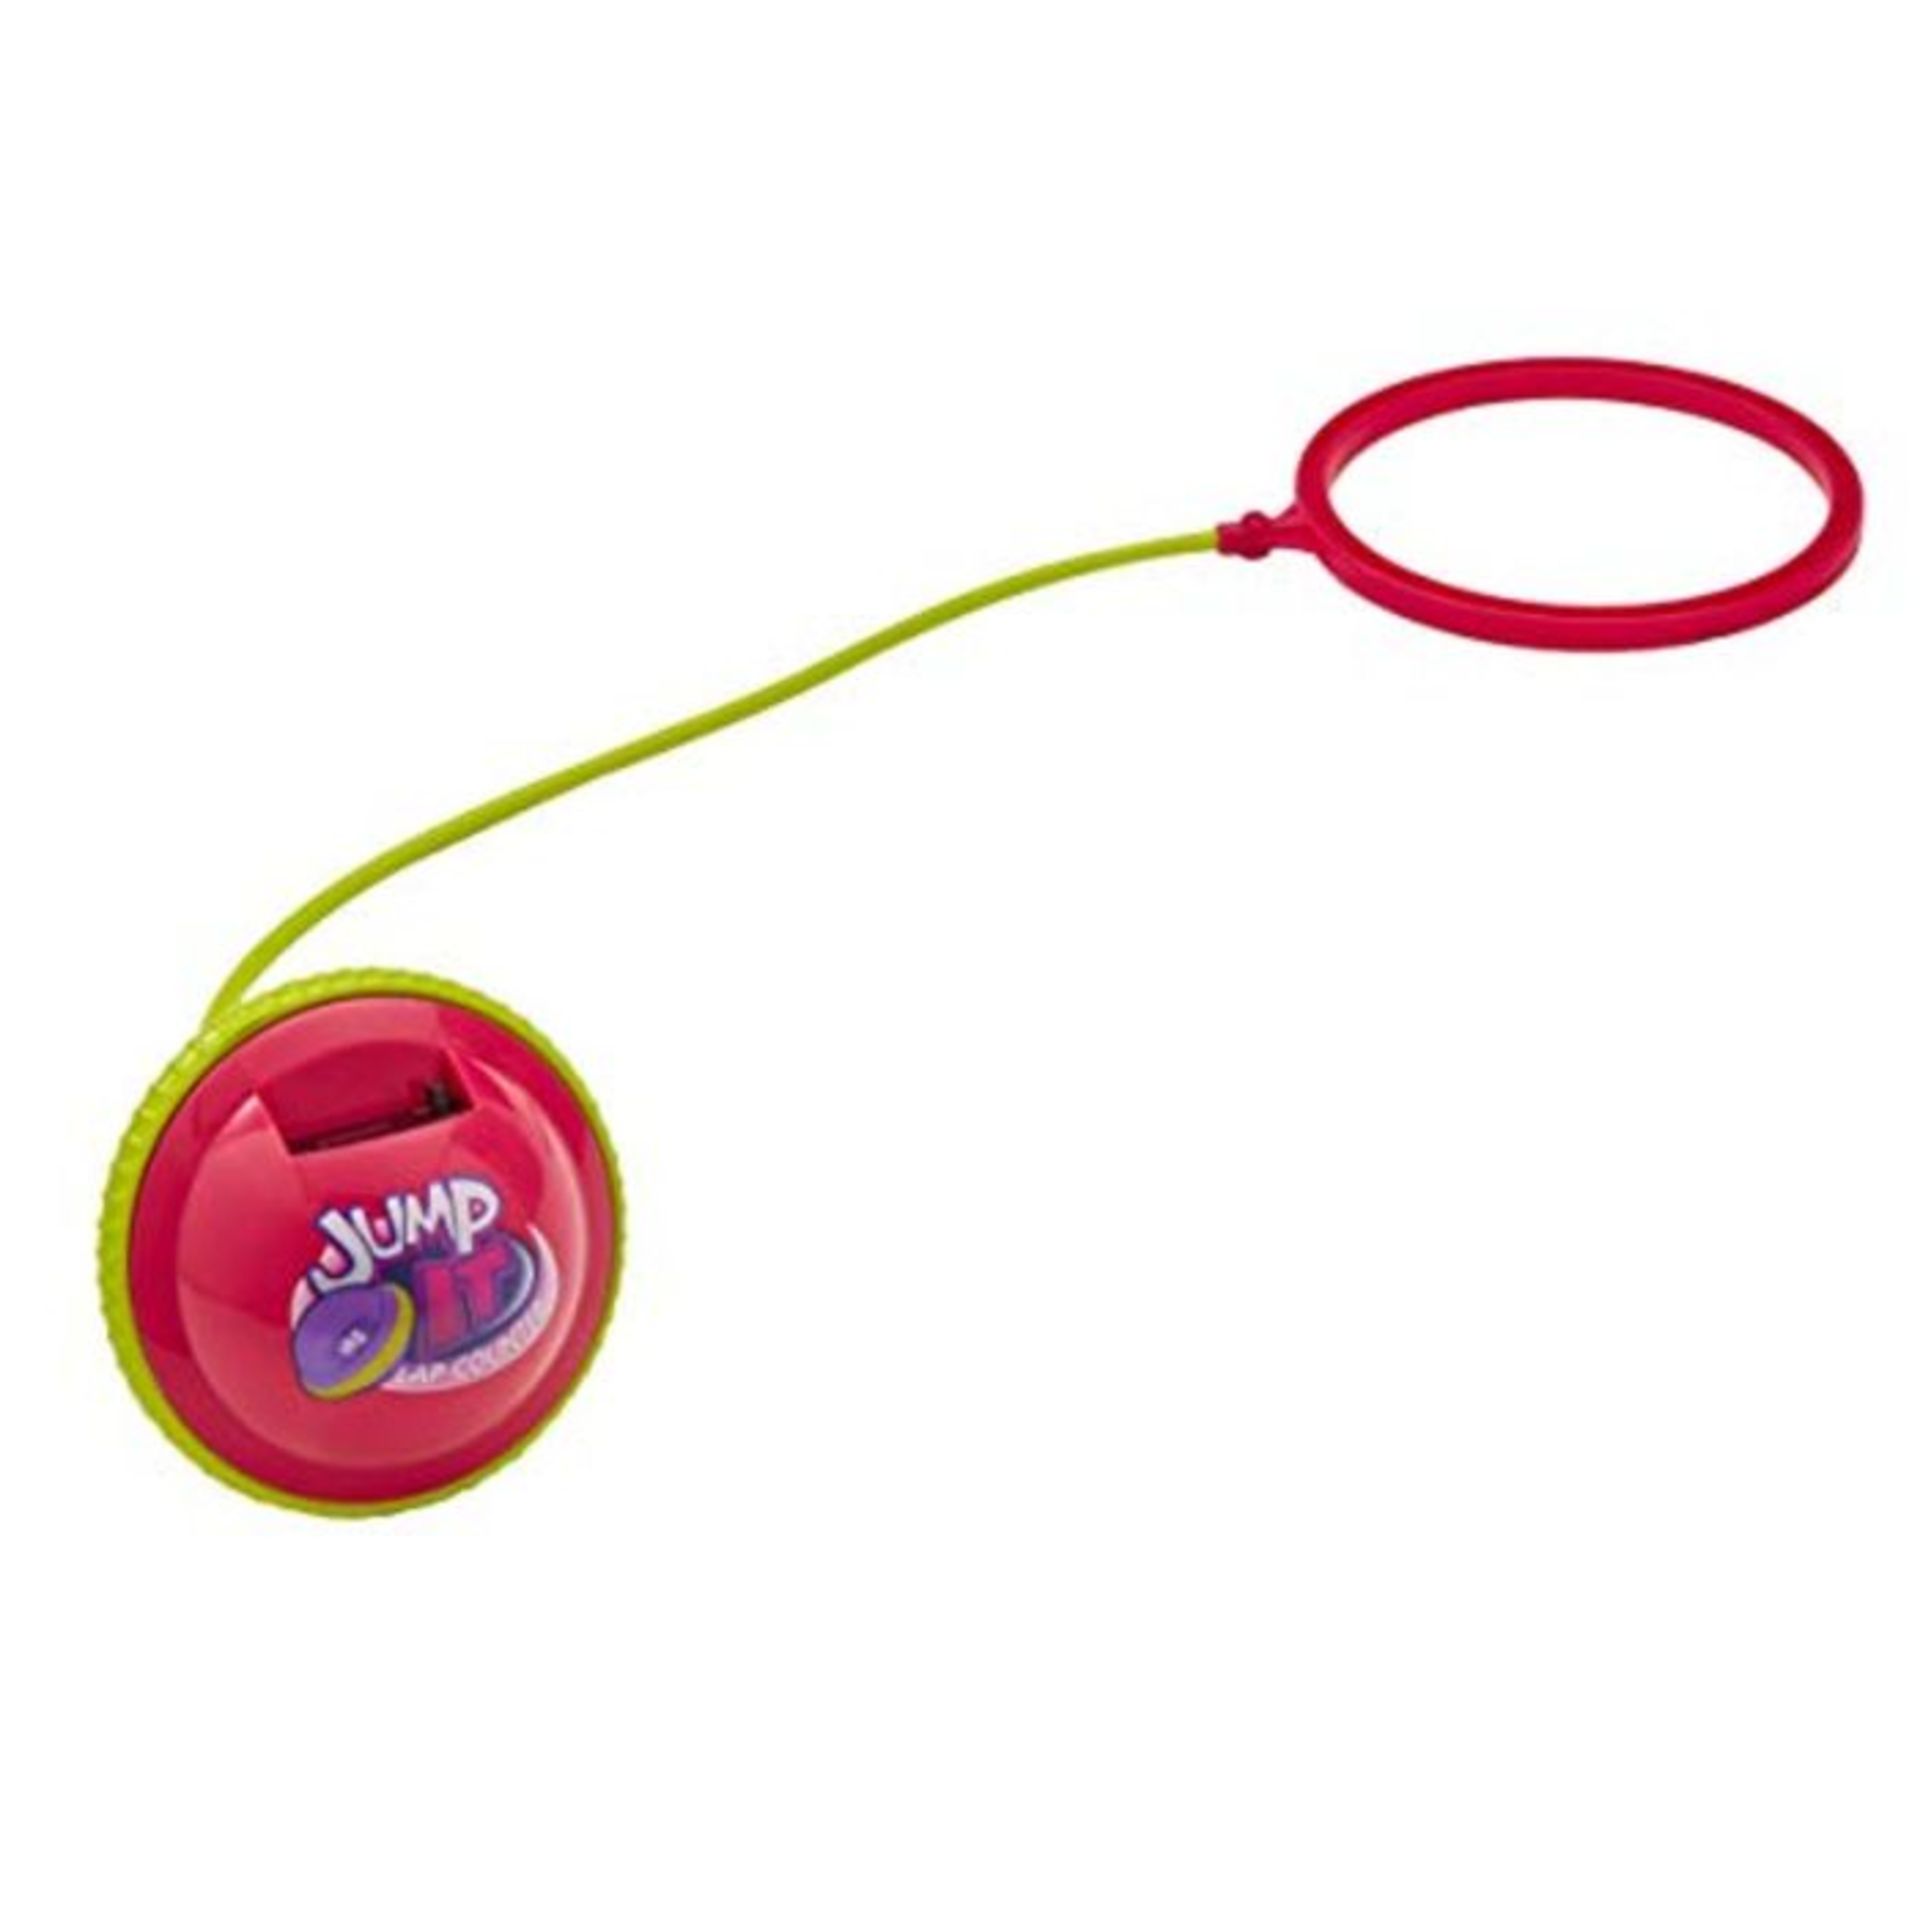 Jump it 07556 Pink-Skipping Fitness Coordination Toy with Counter Upto 1,000 laps for